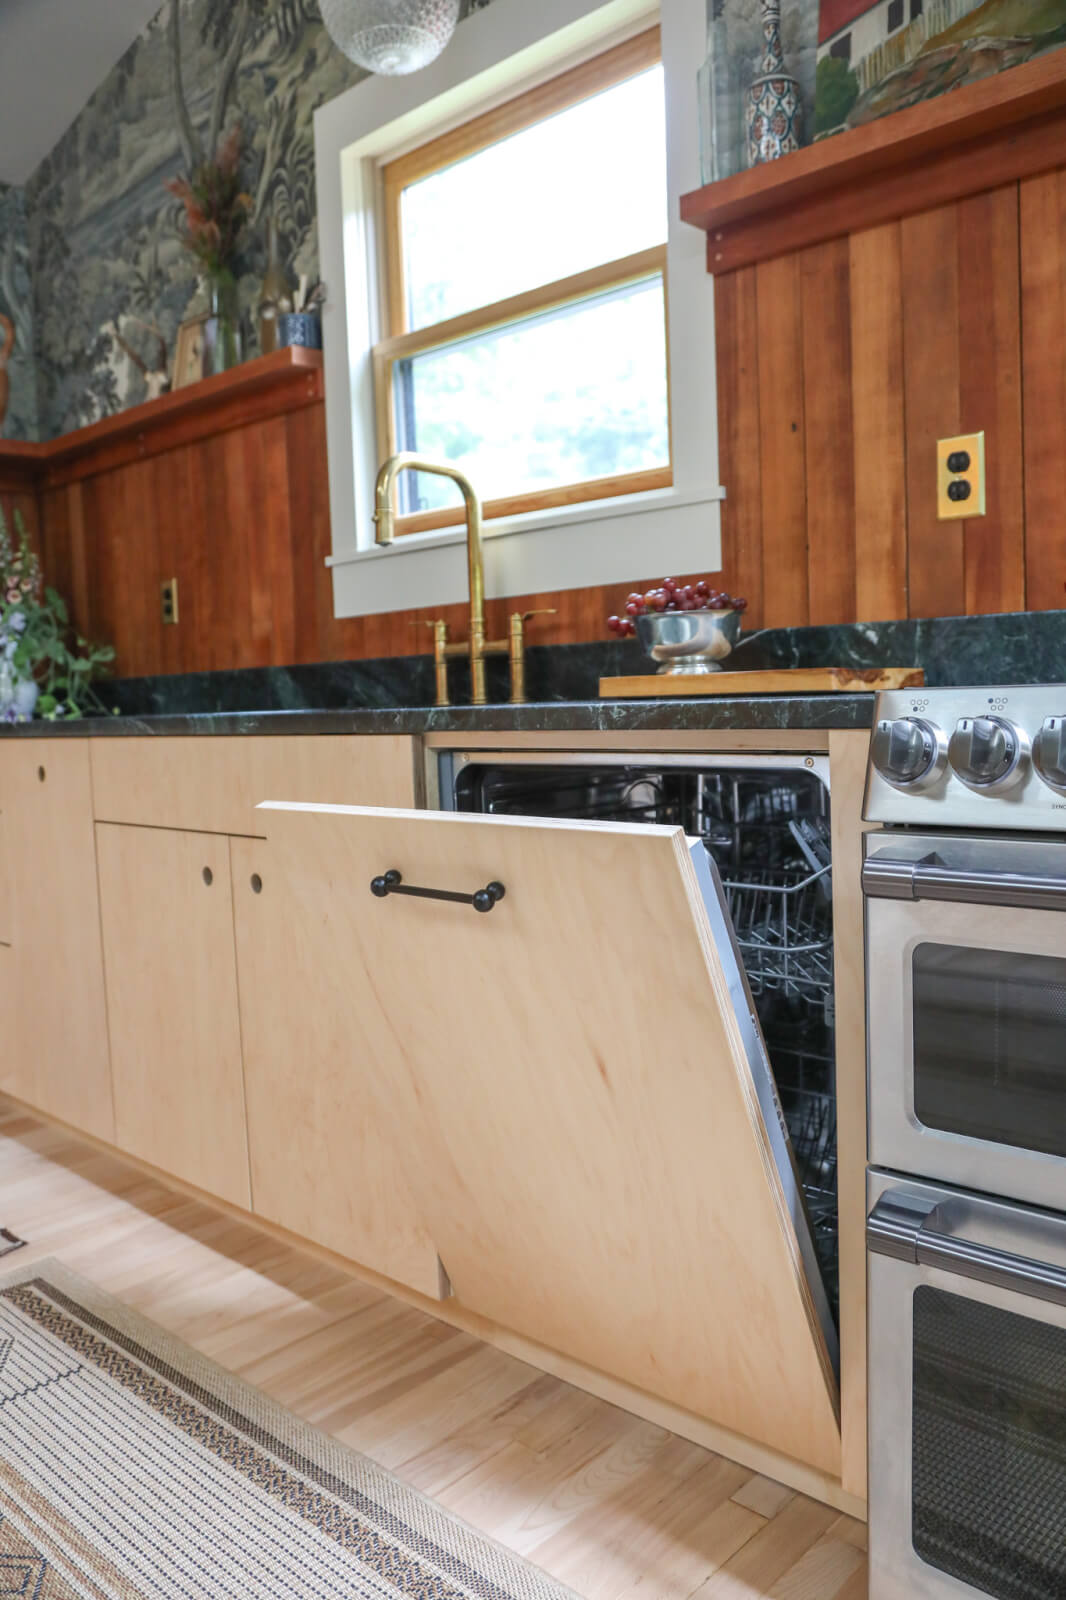 Custom-made plywood kitchen cabinets in Northampton, Massachusetts. An integrated dishwasher is shown open.